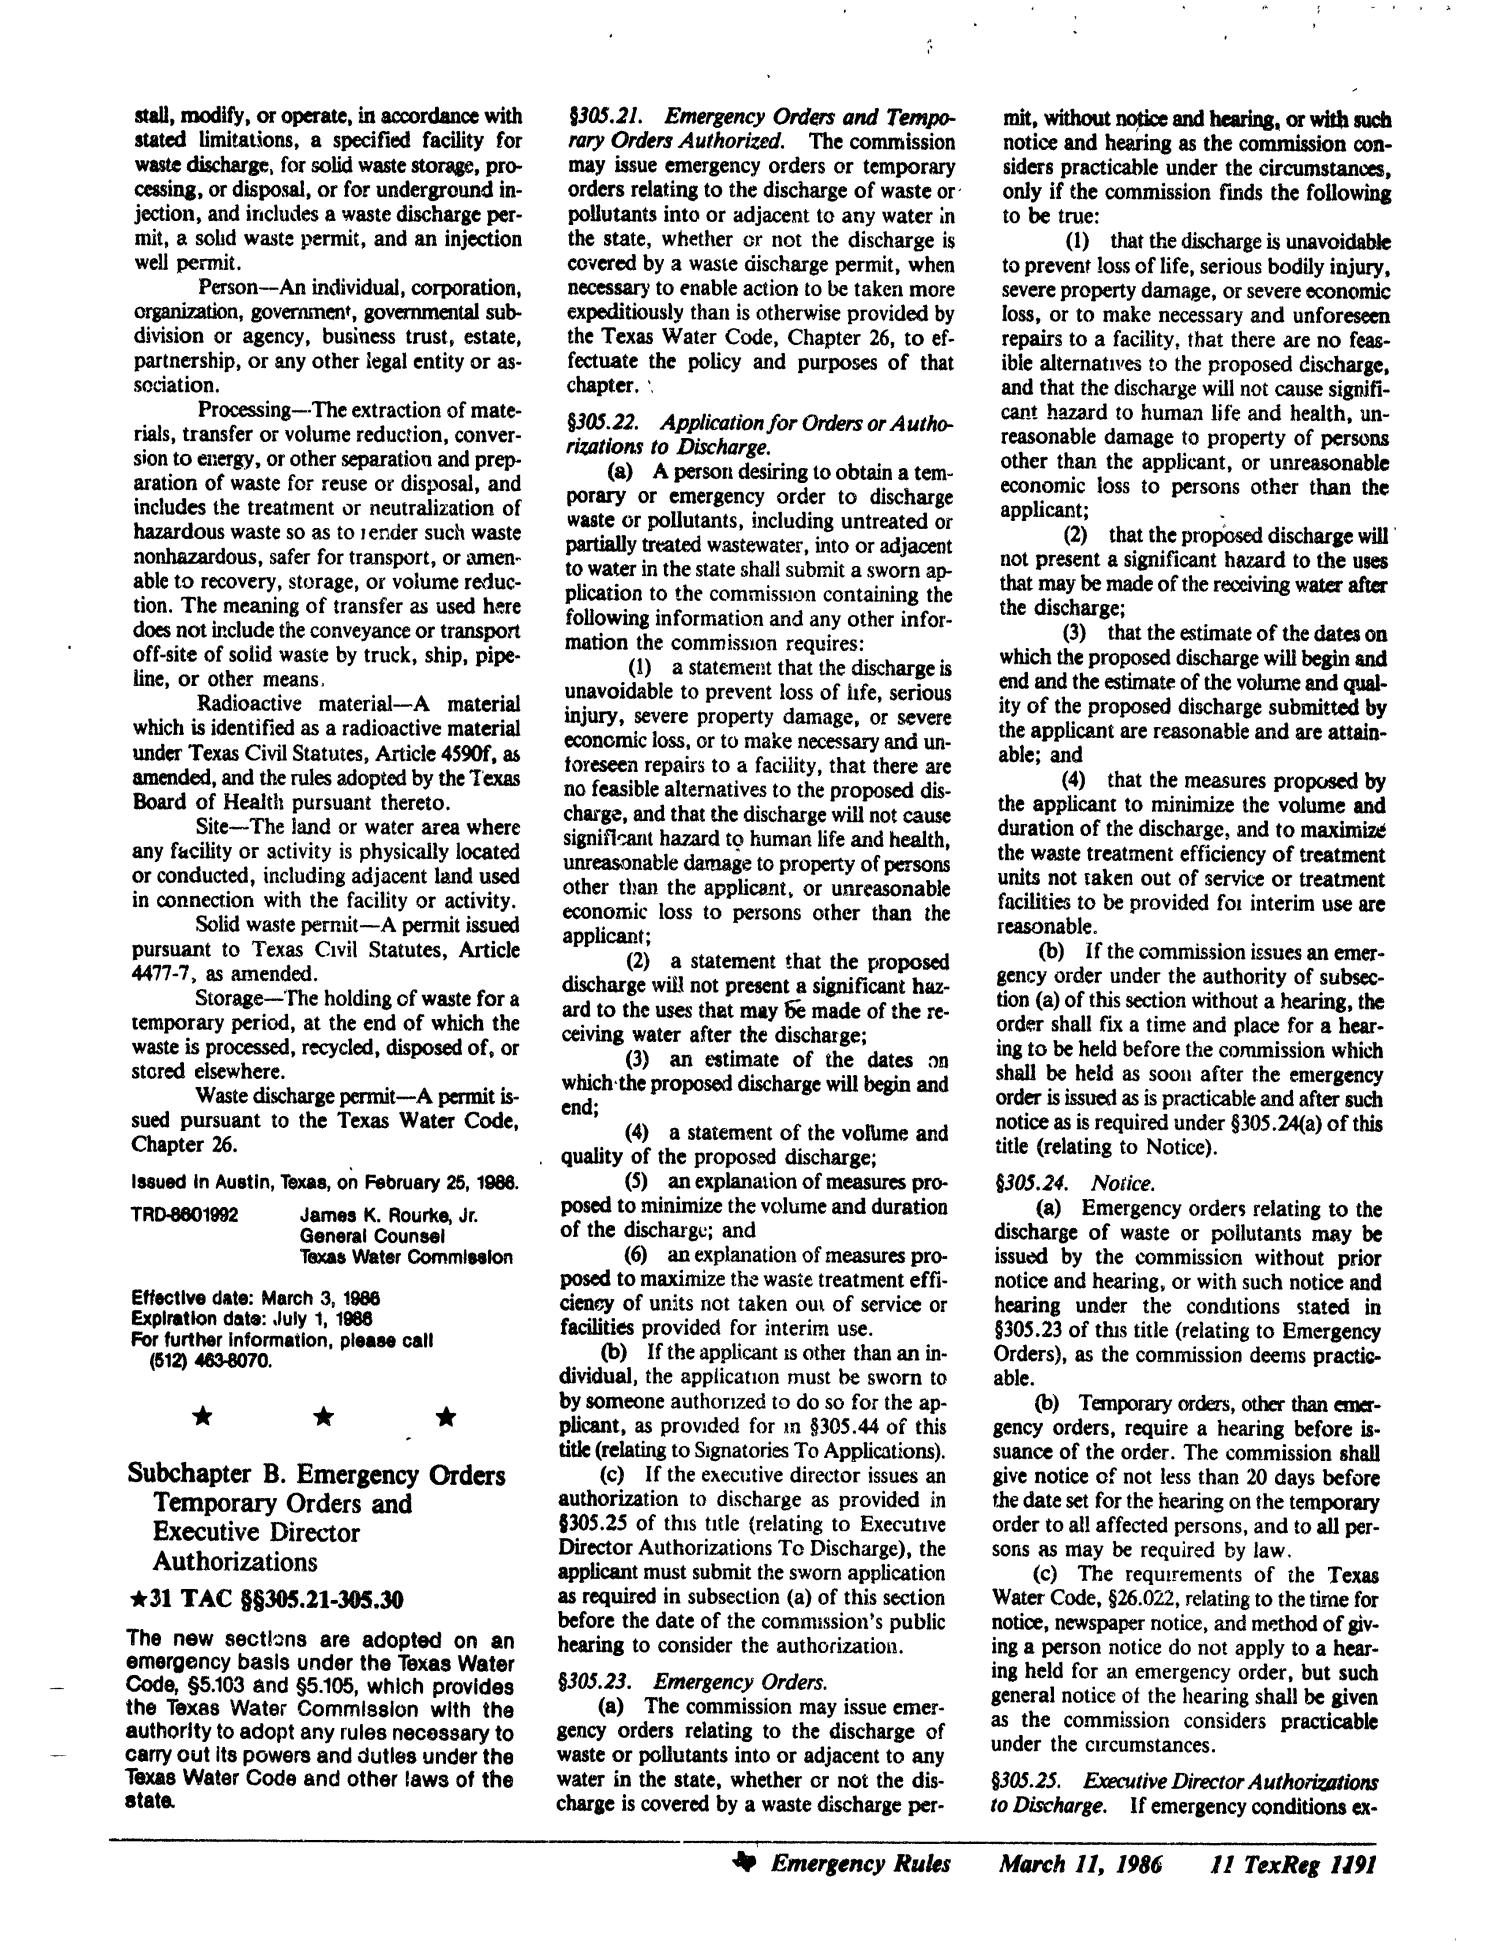 Texas Register, Volume 11, Number 19, Pages 1163-1244, March 11, 1986
                                                
                                                    1191
                                                